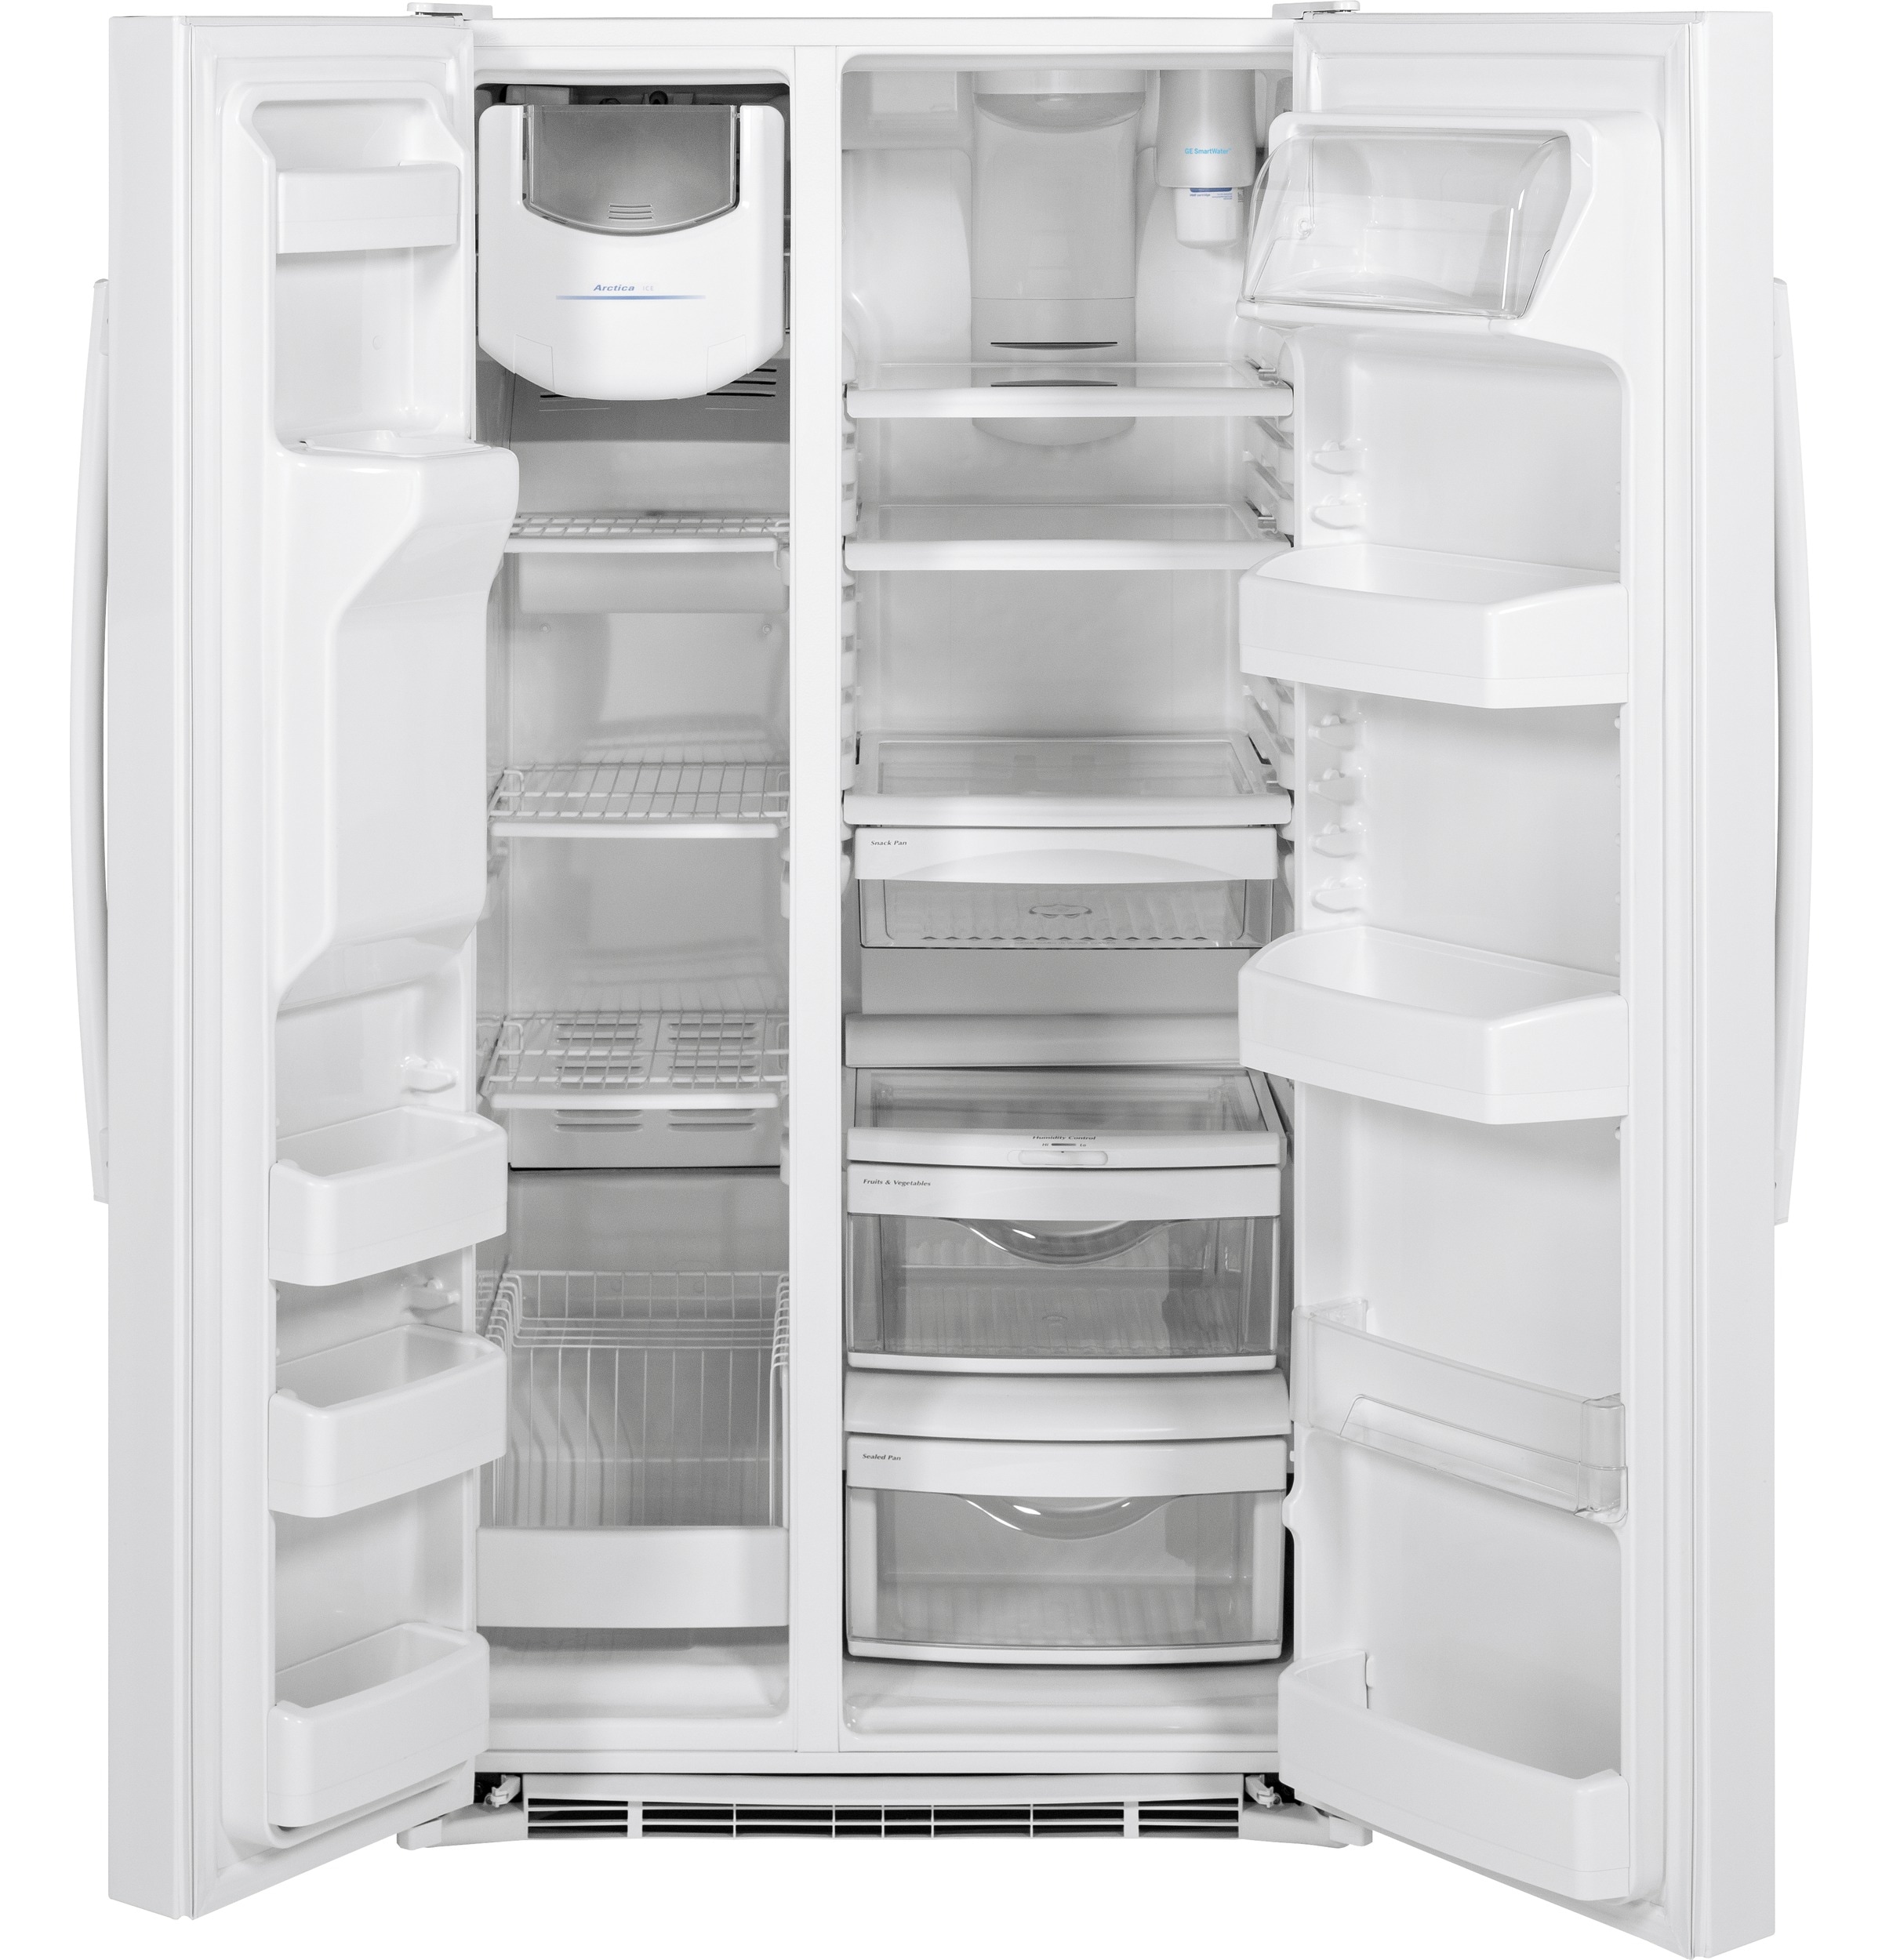 GE 25.3-cu ft Side-by-Side Refrigerator with Ice Maker (White) at Lowes.com